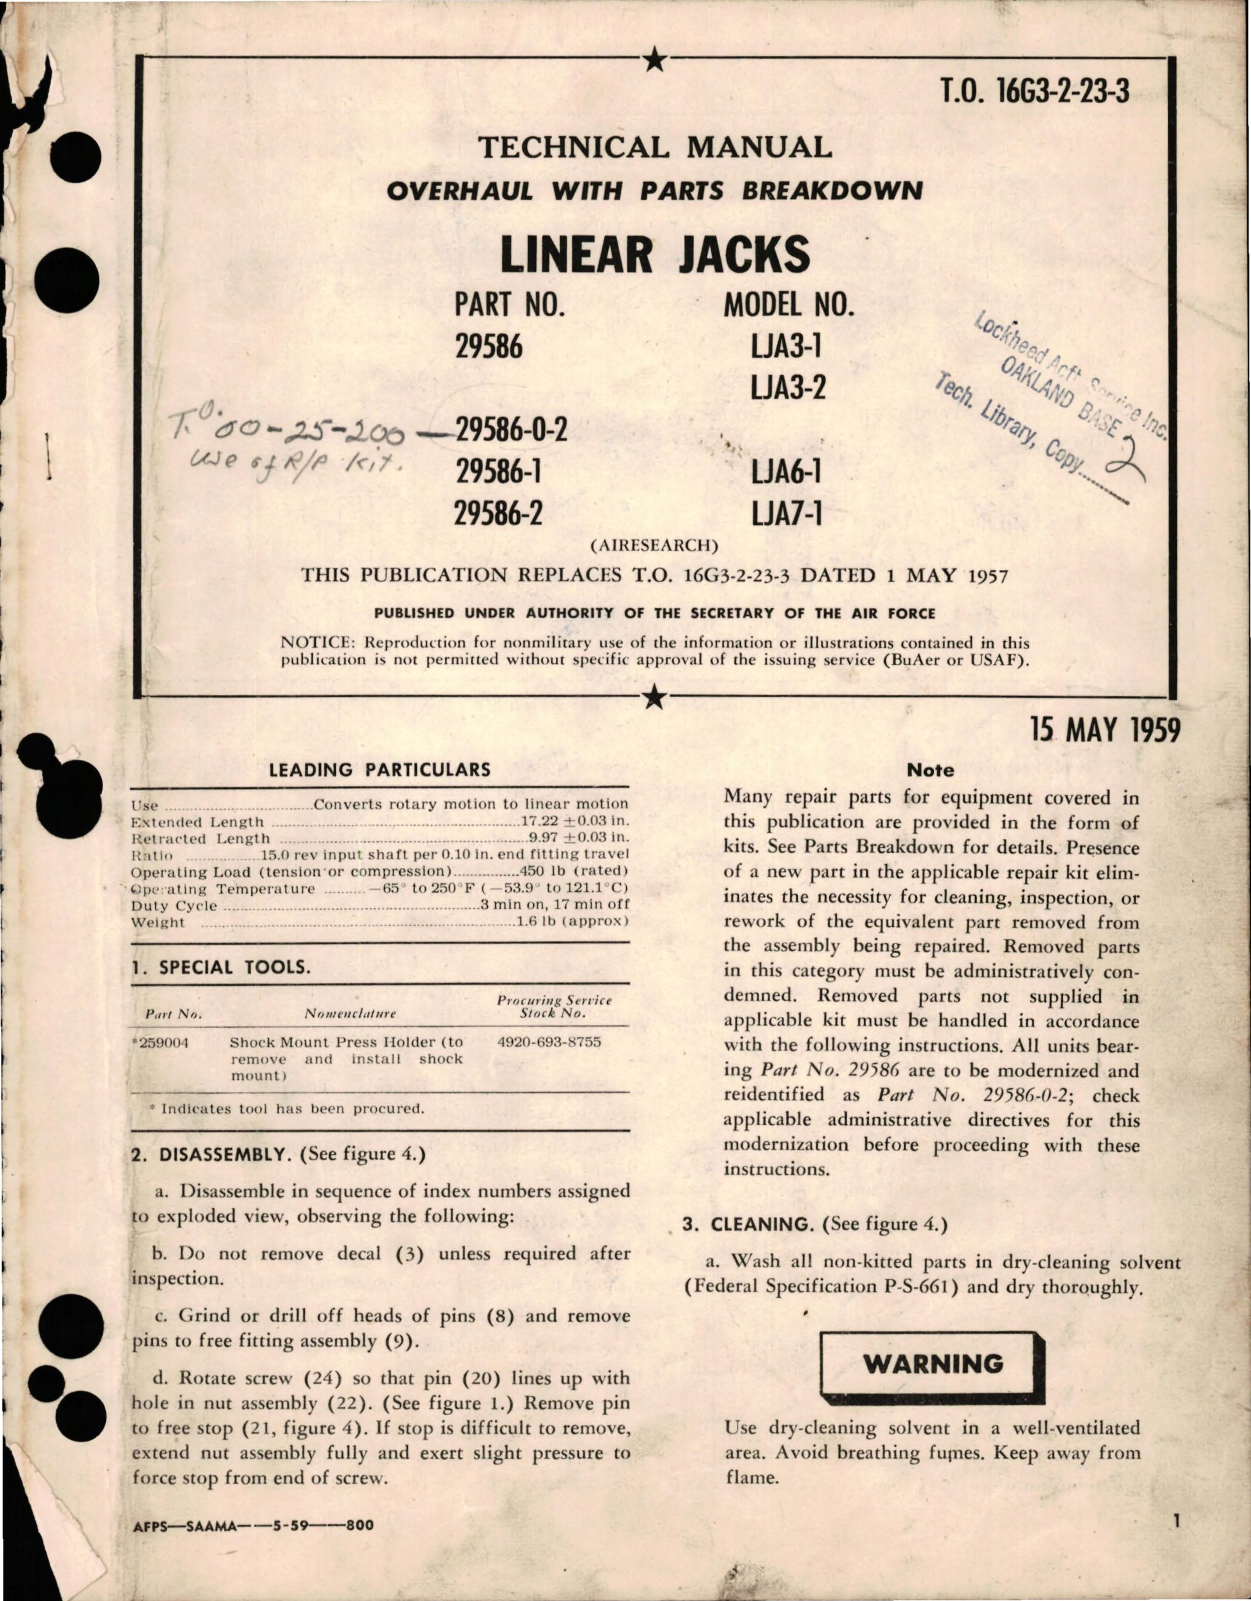 Sample page 1 from AirCorps Library document: Overhaul with Parts Breakdown for Linear Jacks - Parts 29586, 29586-1, 29586-2, and 29586-0-2 